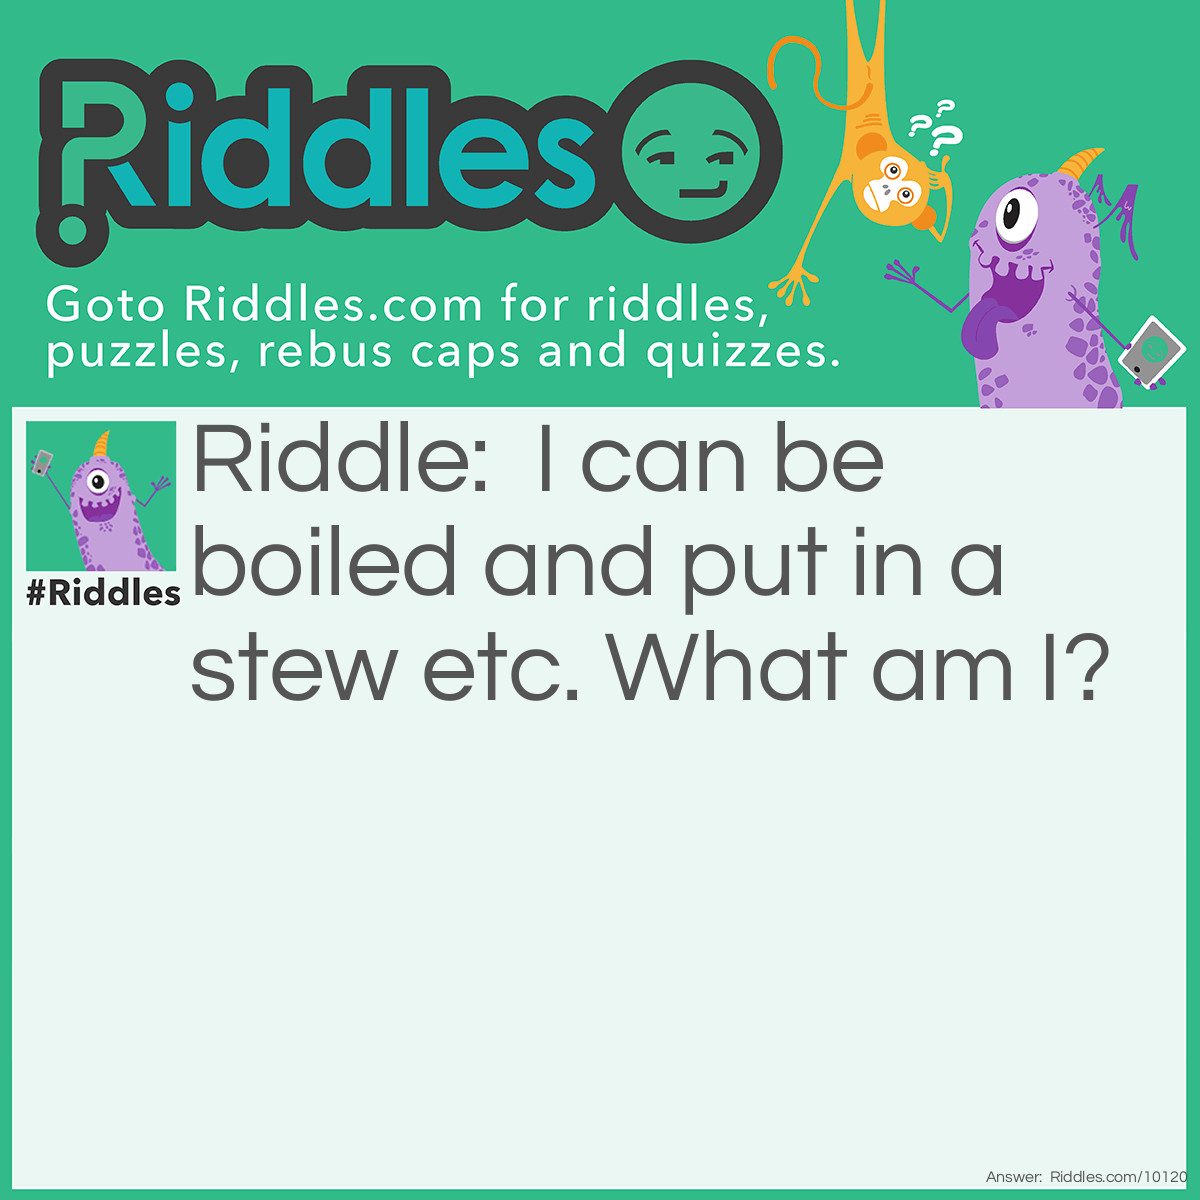 Riddle: I can be boiled and put in a stew etc. What am I? Answer: I am a Potato.